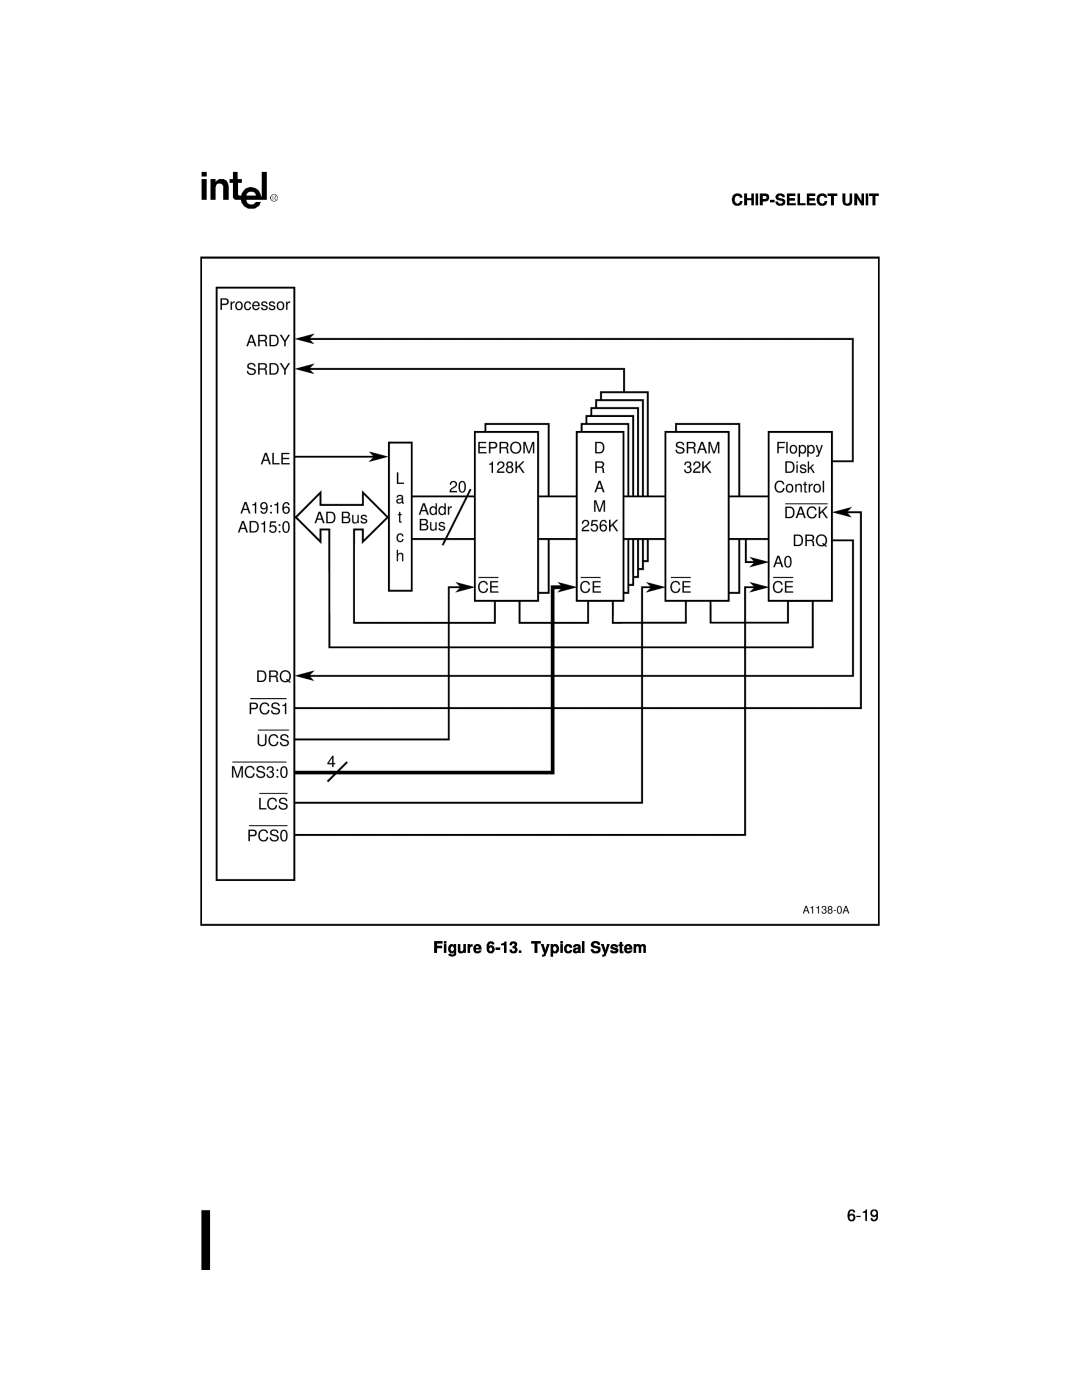 Intel 80C188XL, 80C186XL user manual Chip-Selectunit, 13.Typical System 